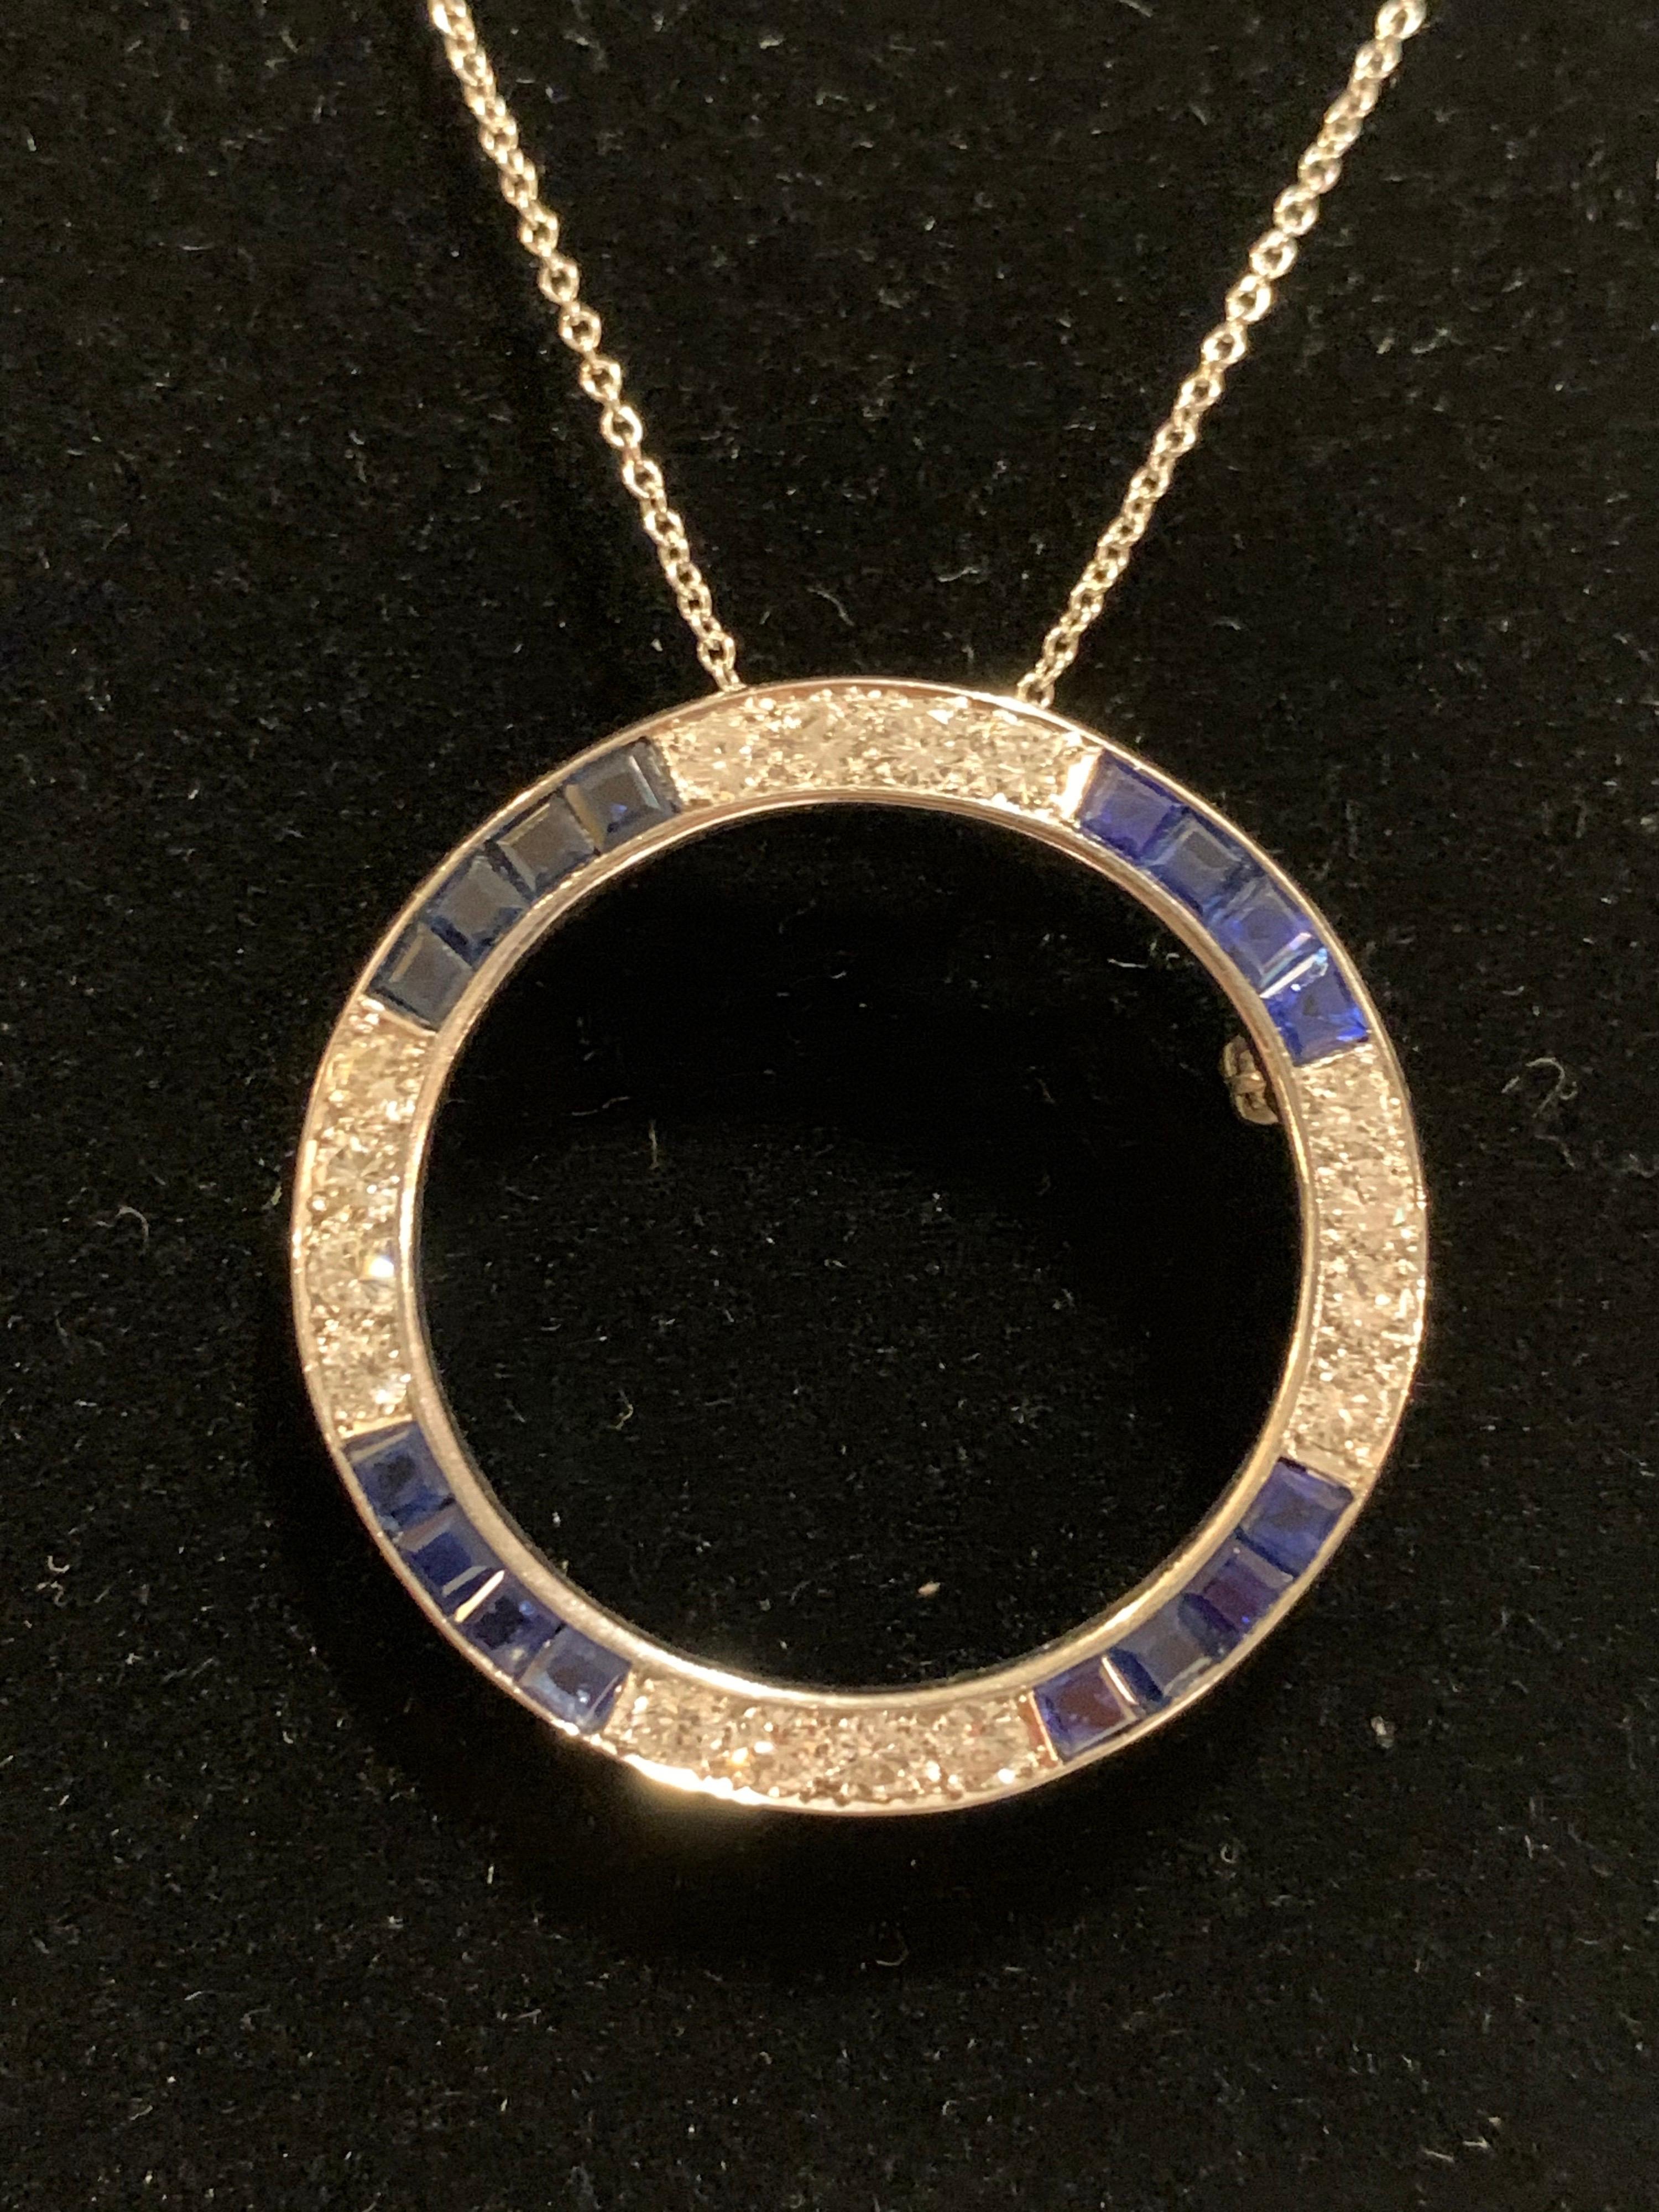 Early 20th Century Vintage Art Deco JE Caldwell Platinum Pin or Pendant with Diamonds and Sapphires